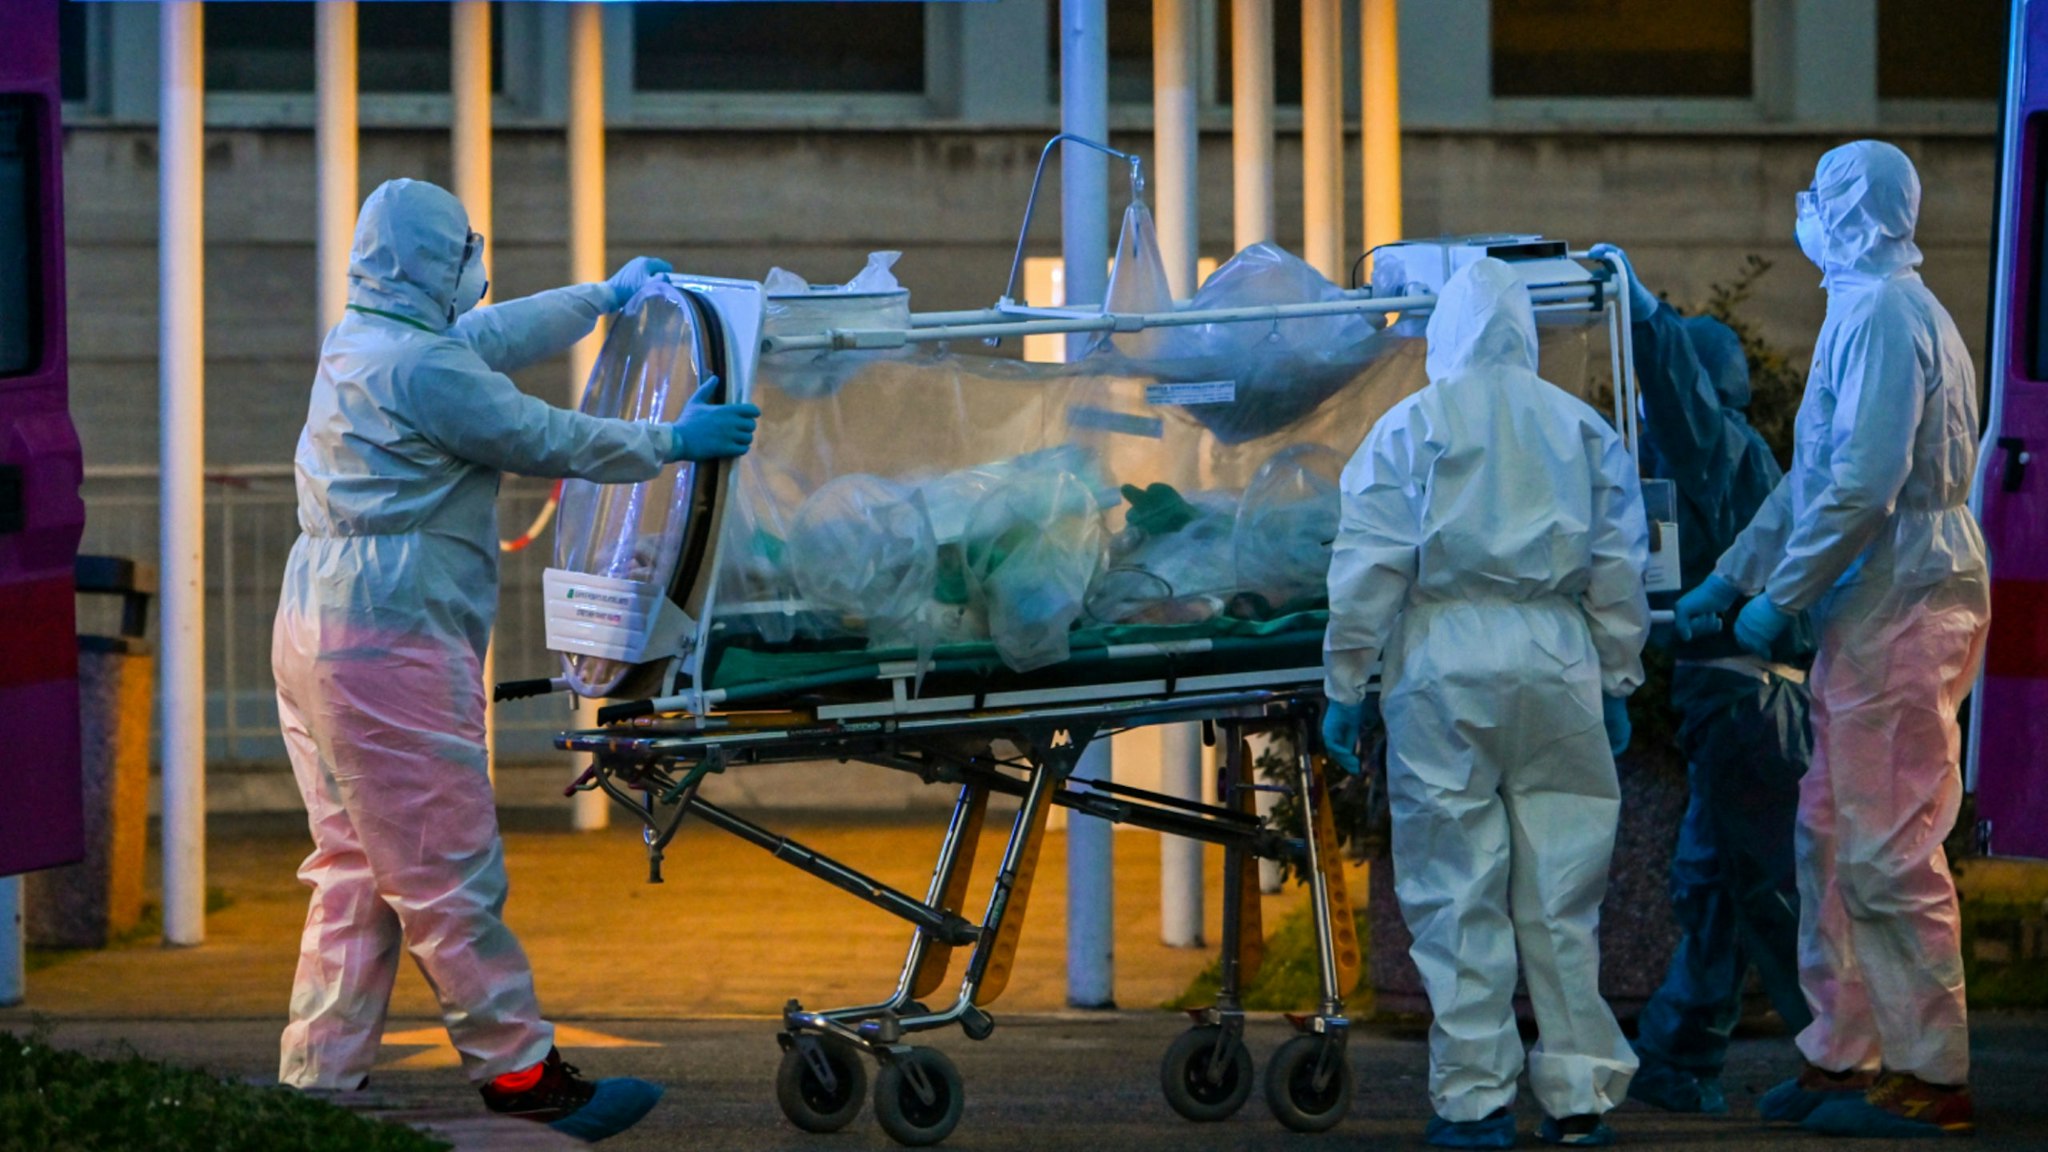 Medical workers in overalls stretch a patient under intensive care into the newly built Columbus Covid 2 temporary hospital to fight the new coronavirus infection, on March 16, 2020 at the Gemelli hospital in Rome.